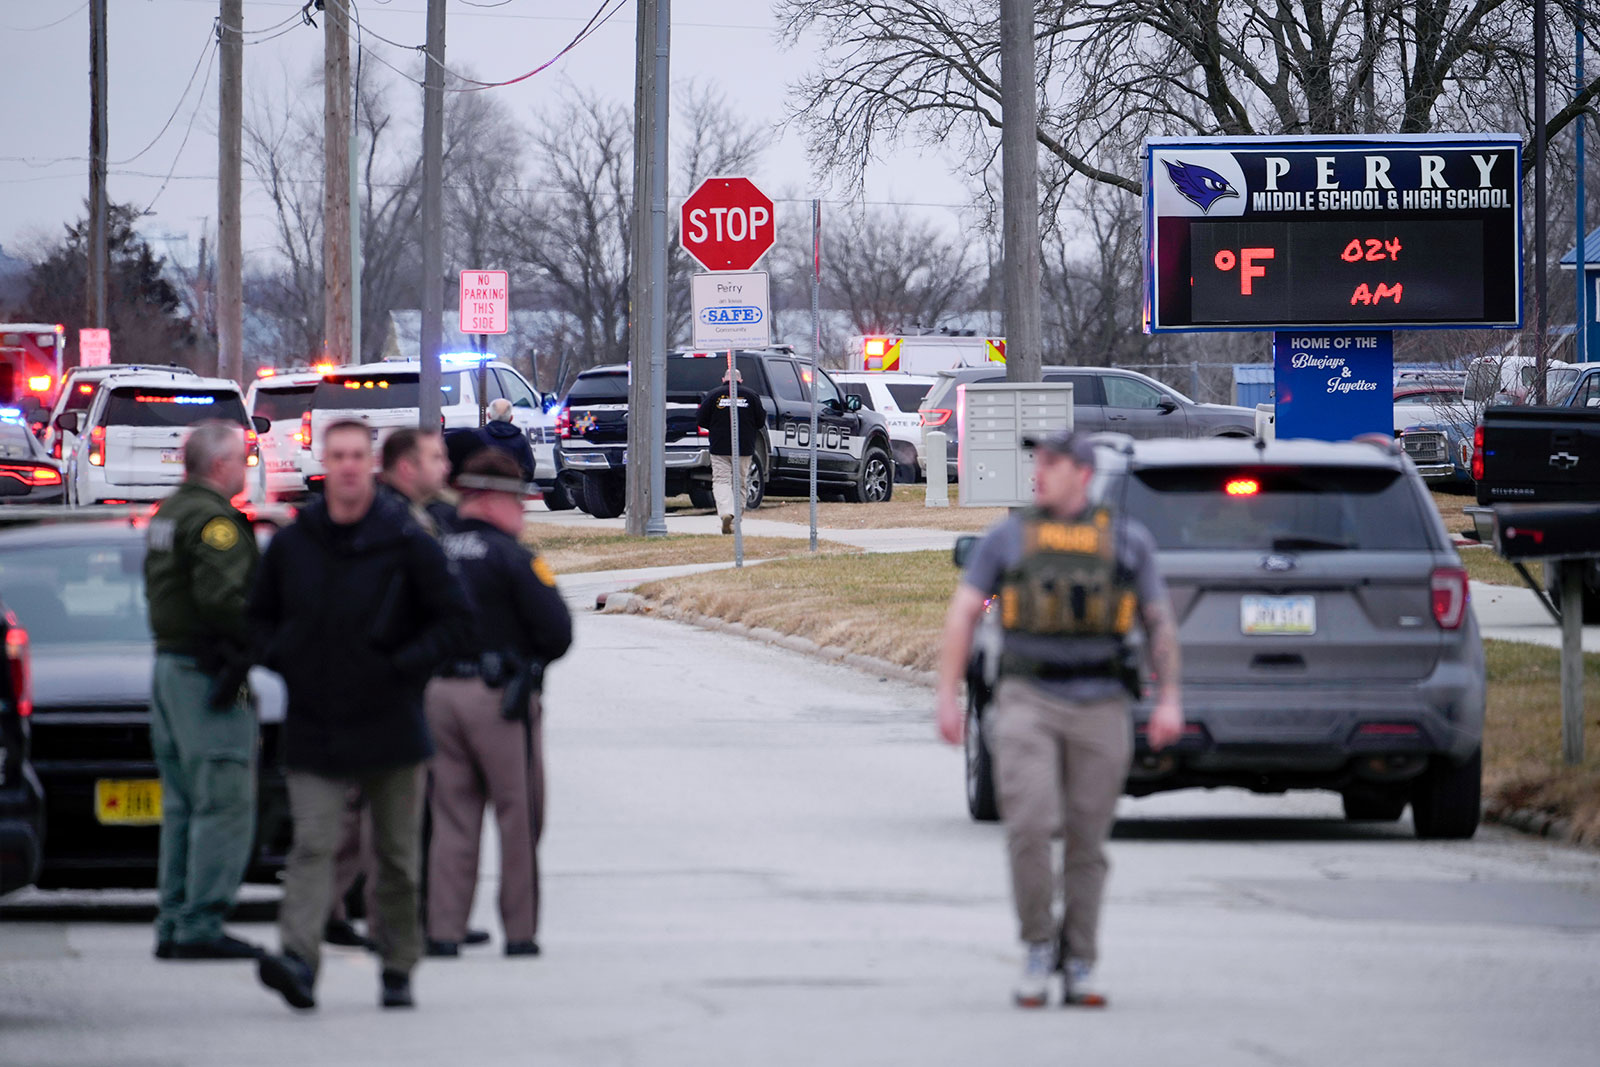 Shooting reported at Perry High School in Iowa 95679a6c-db74-4e0c-a5f3-bcc2adc3a1b0